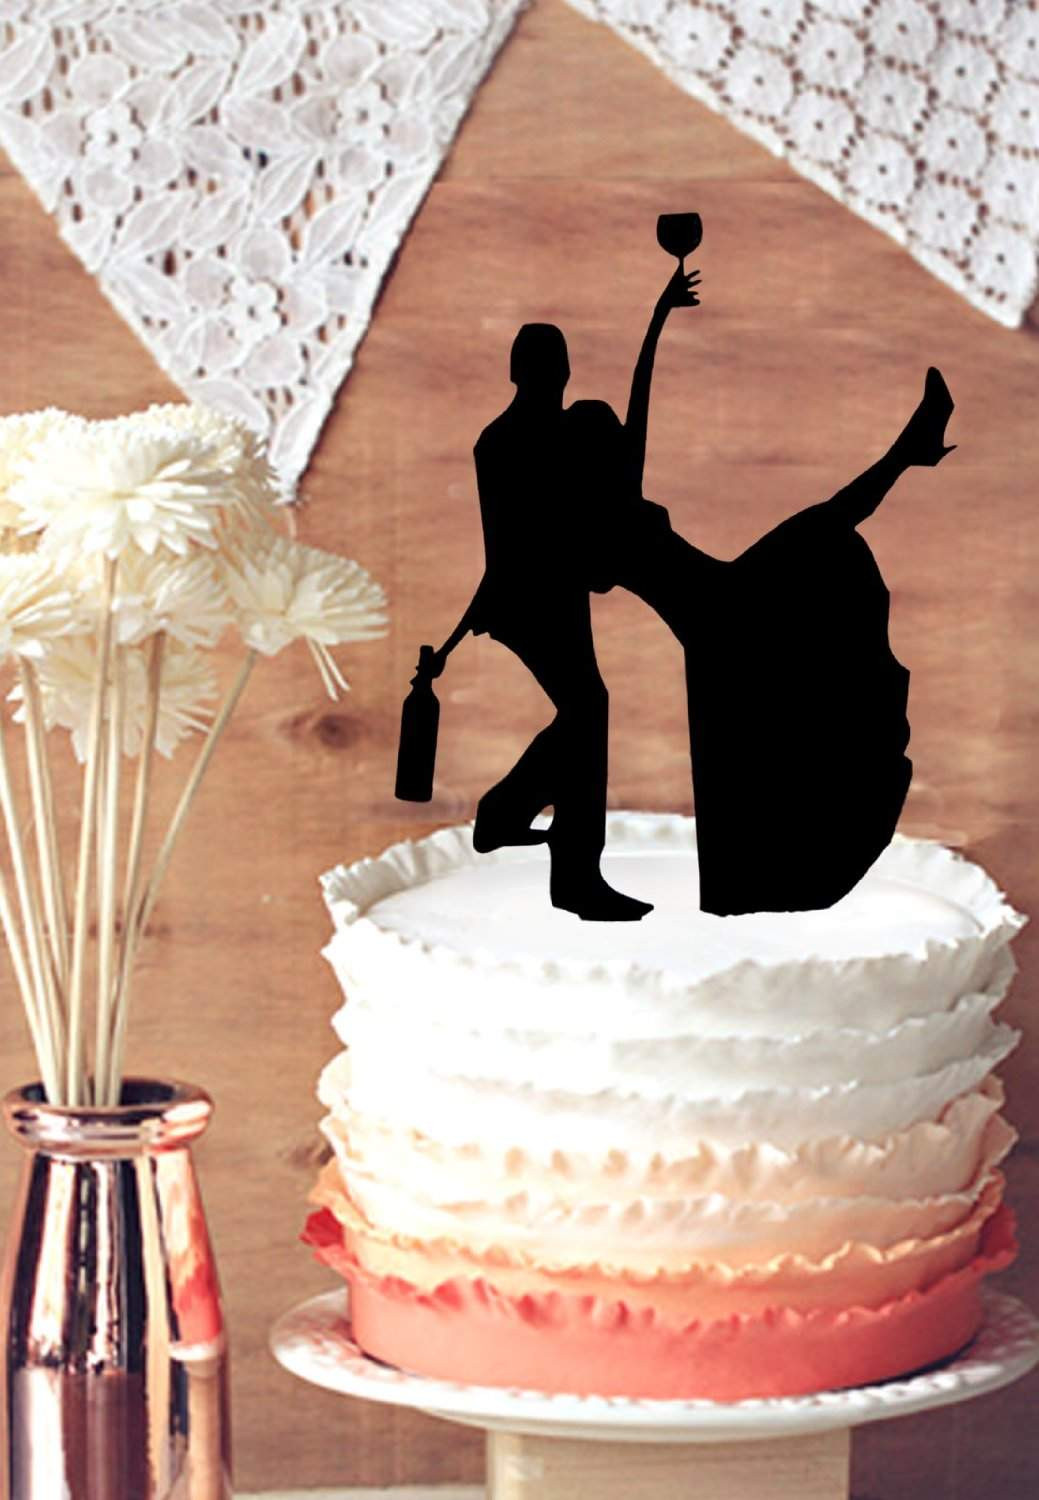 Custom Cake Toppers Wedding
 Top 10 Best Funny Wedding Cake Toppers